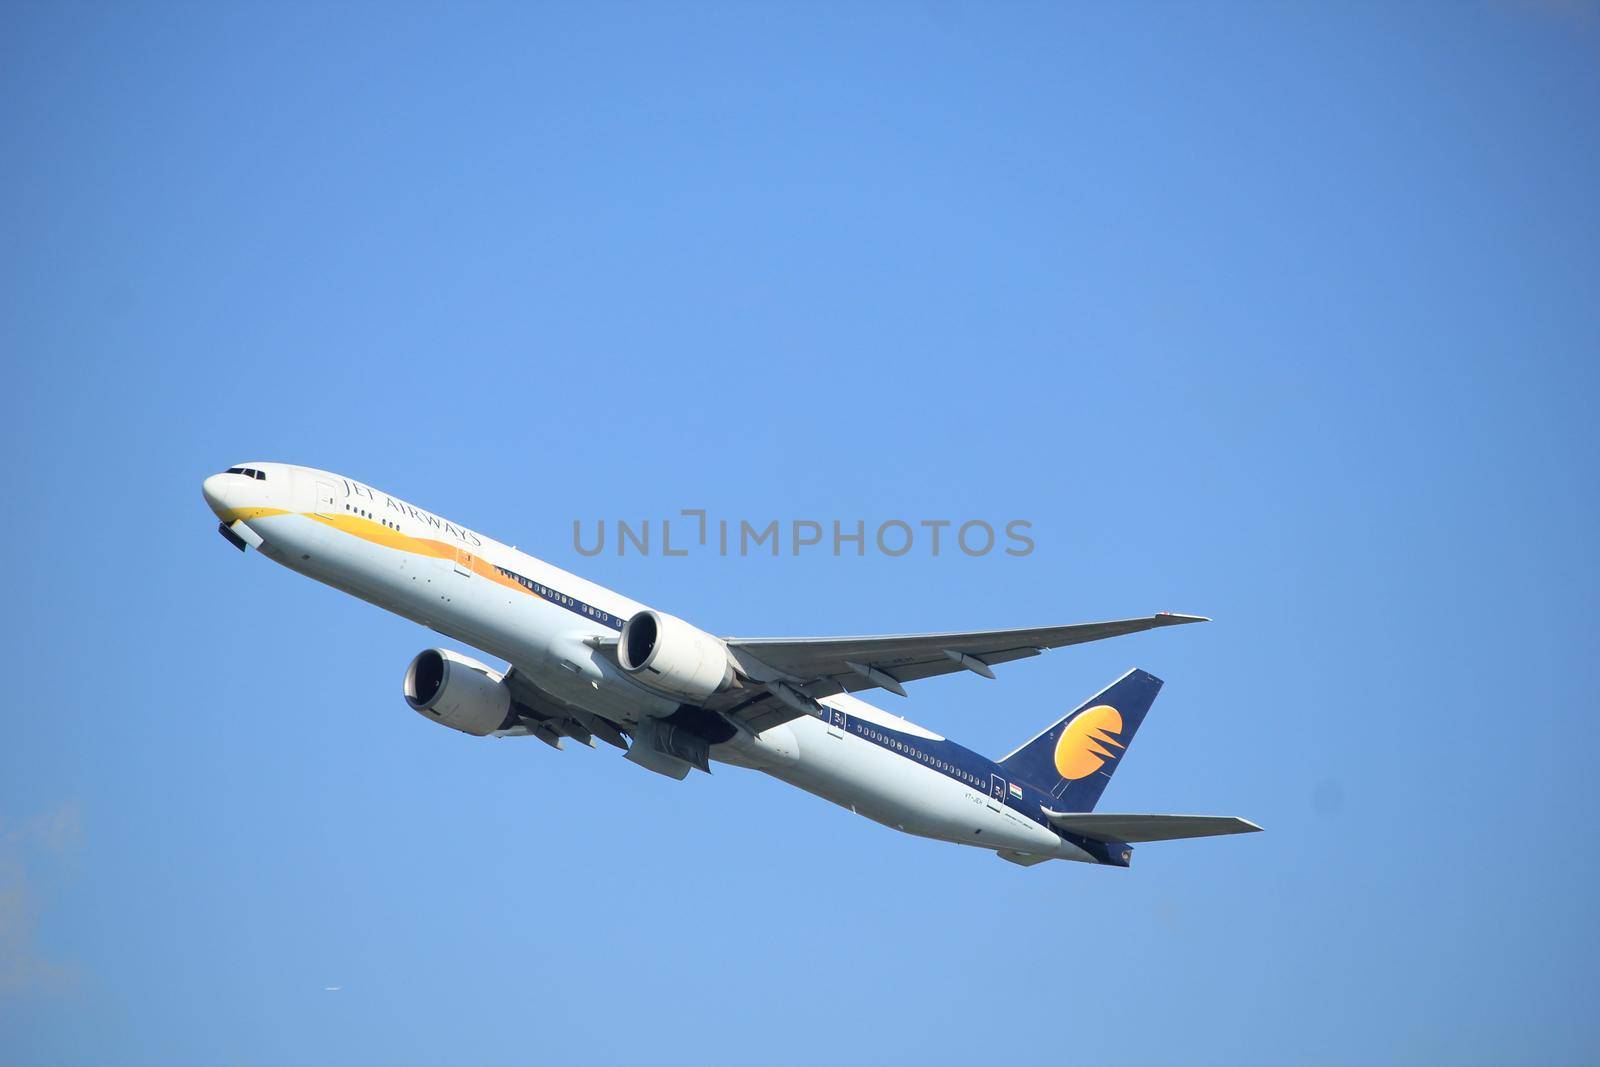 Amsterdam the Netherlands - September 23rd 2017: VT-JEH Jet Airways Boeing 777-35R takeoff from Kaagbaan runway, Amsterdam Airport Schiphol